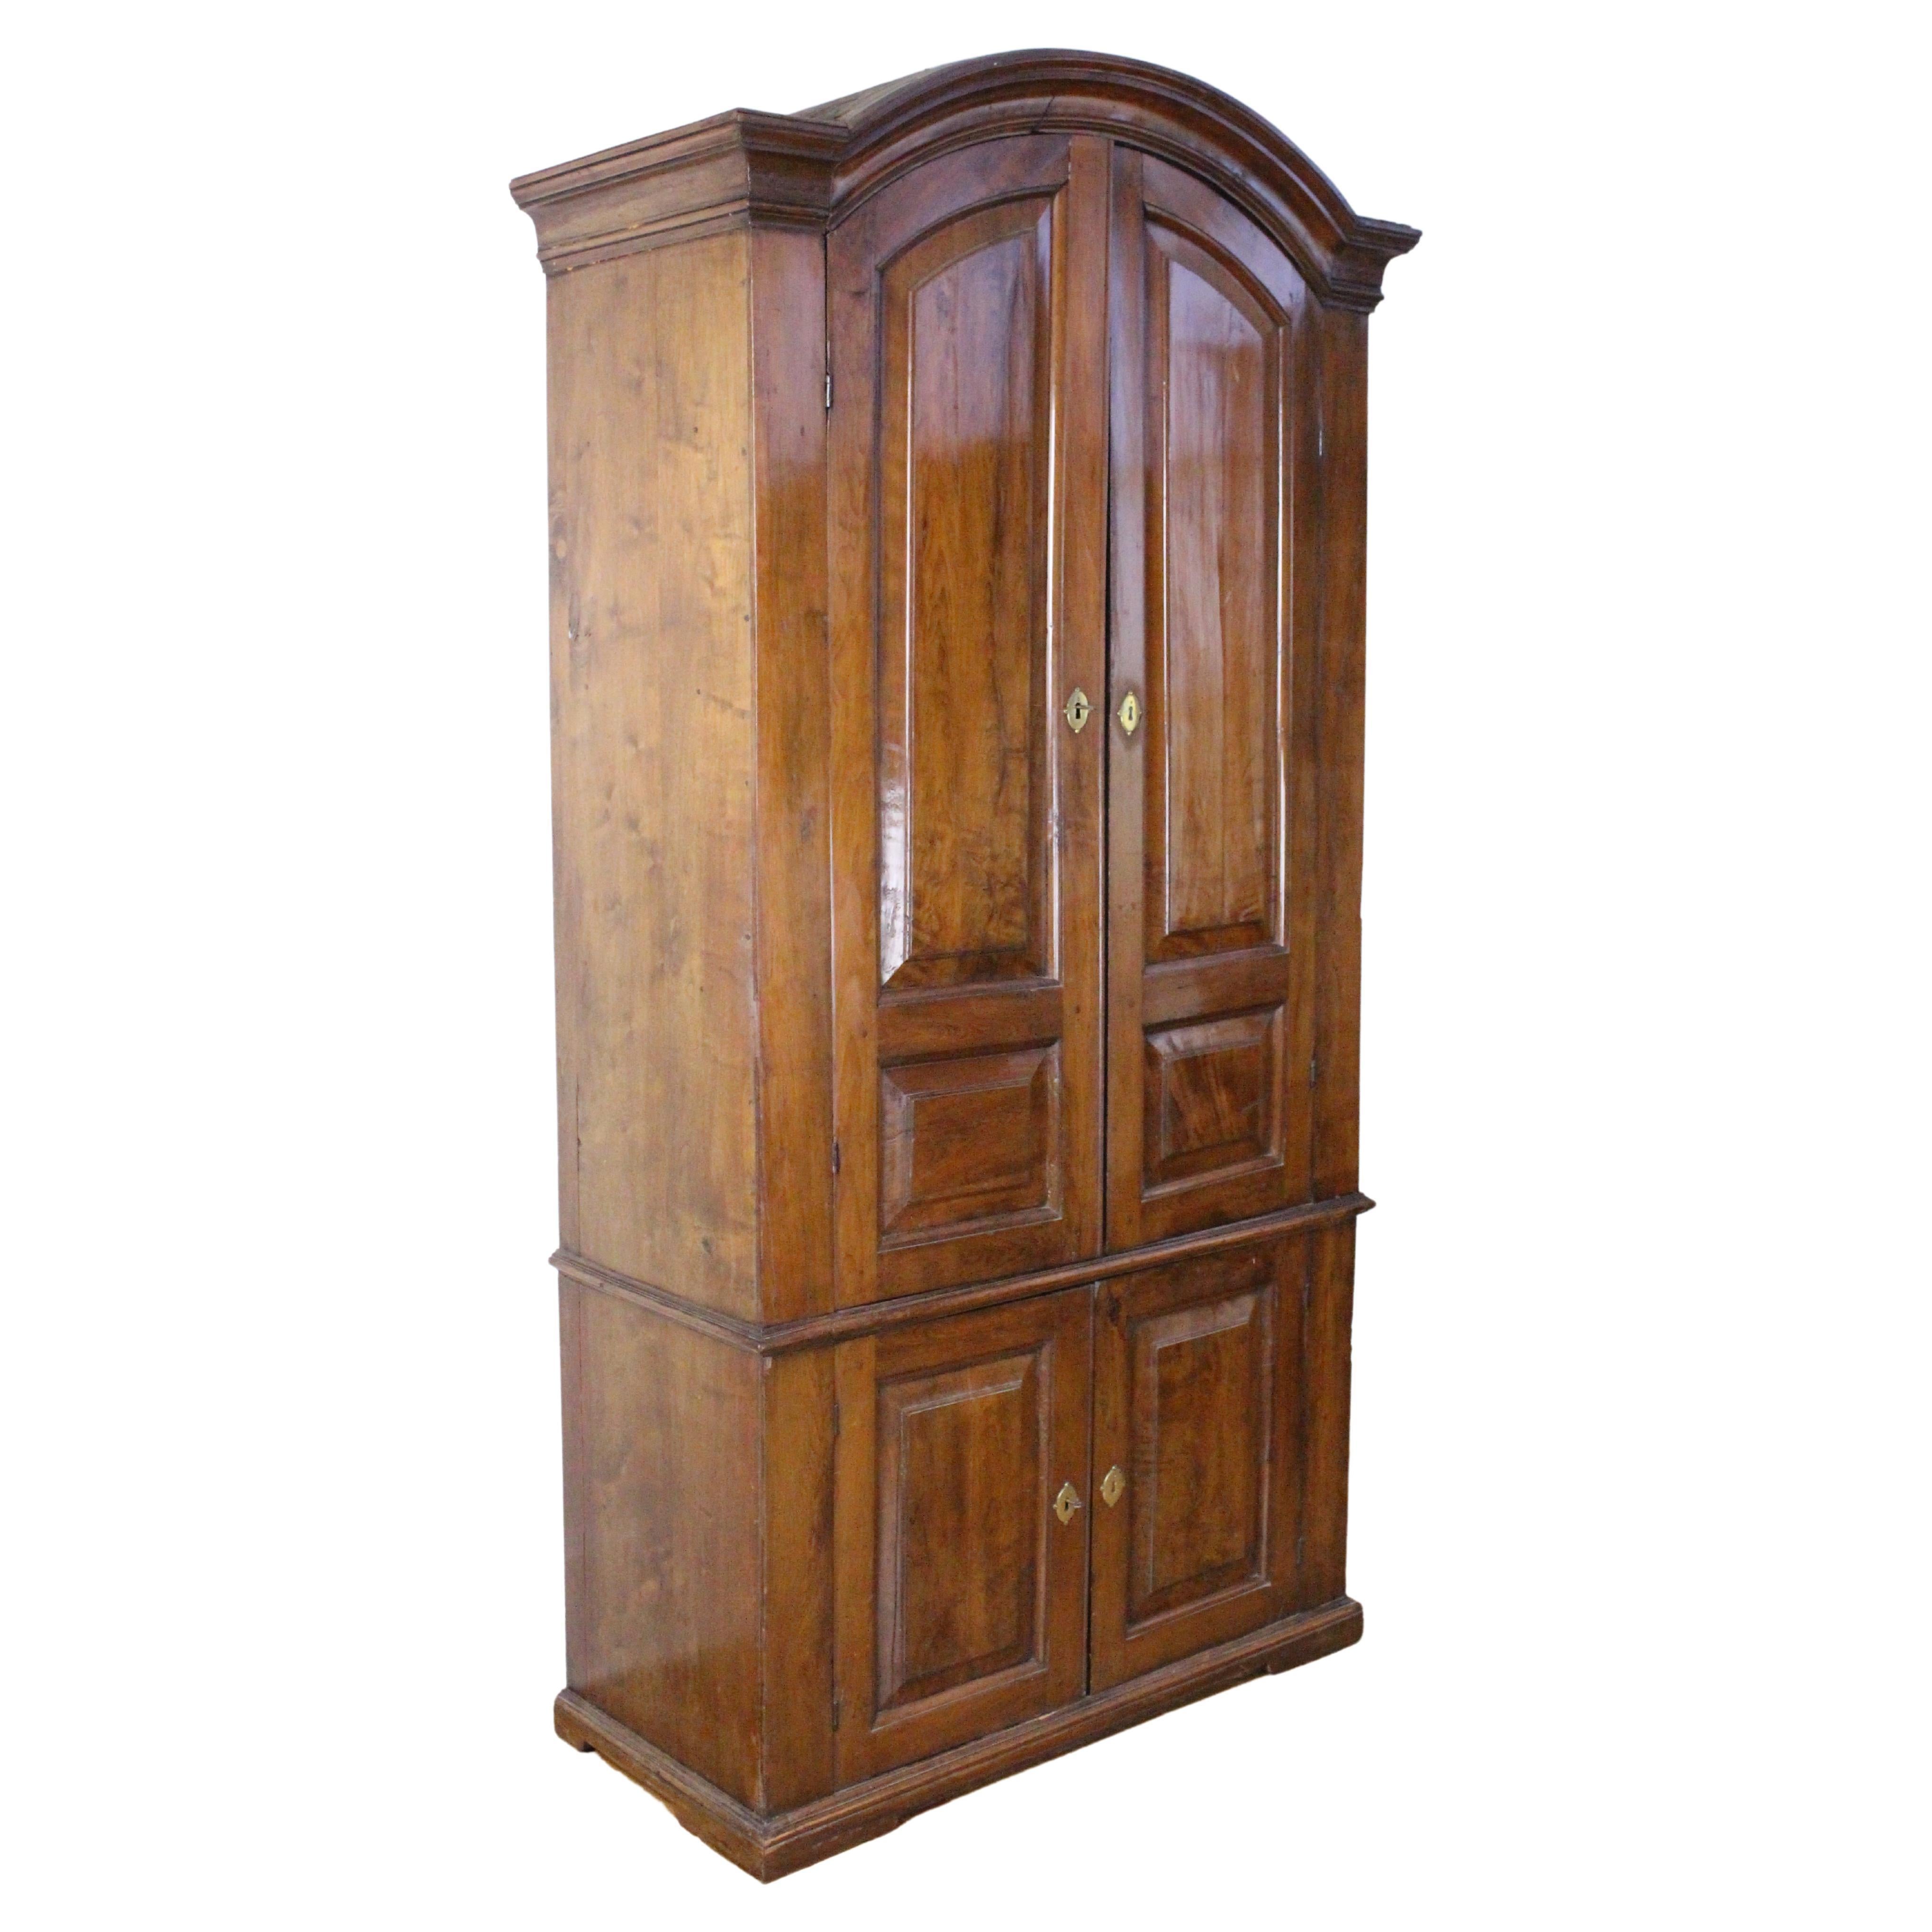 Early 19th Century Yew Wood Linen Cupboard